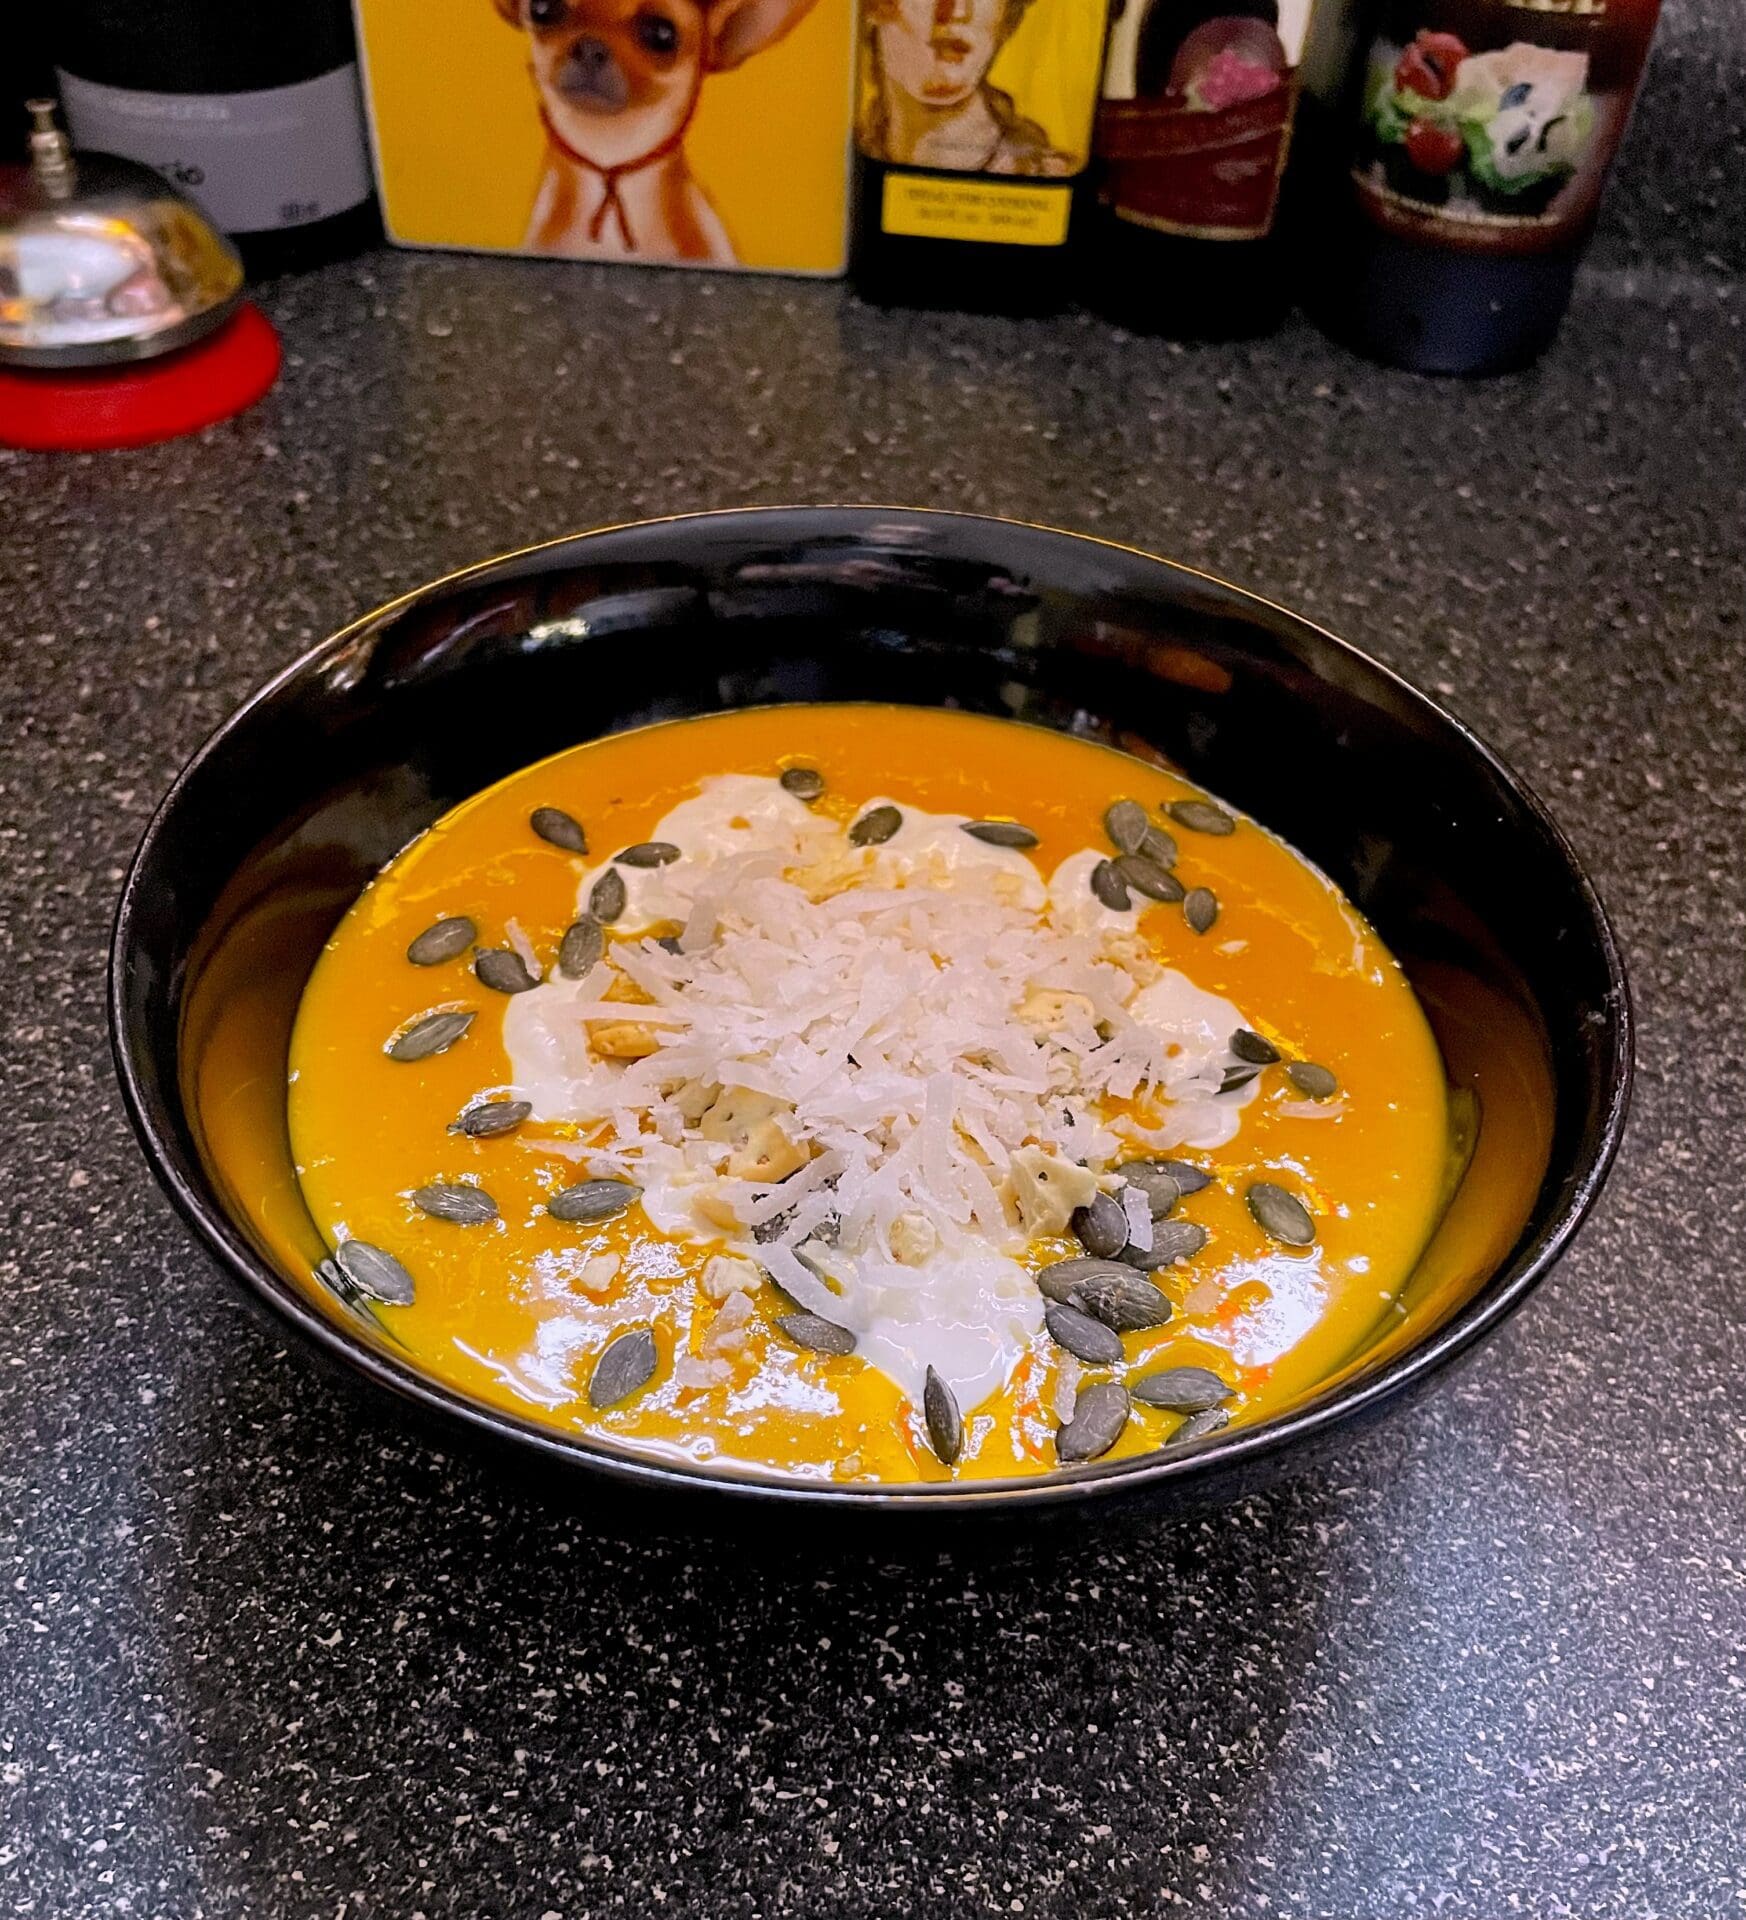 A bowl of soup with pumpkin seeds and parmesan cheese.